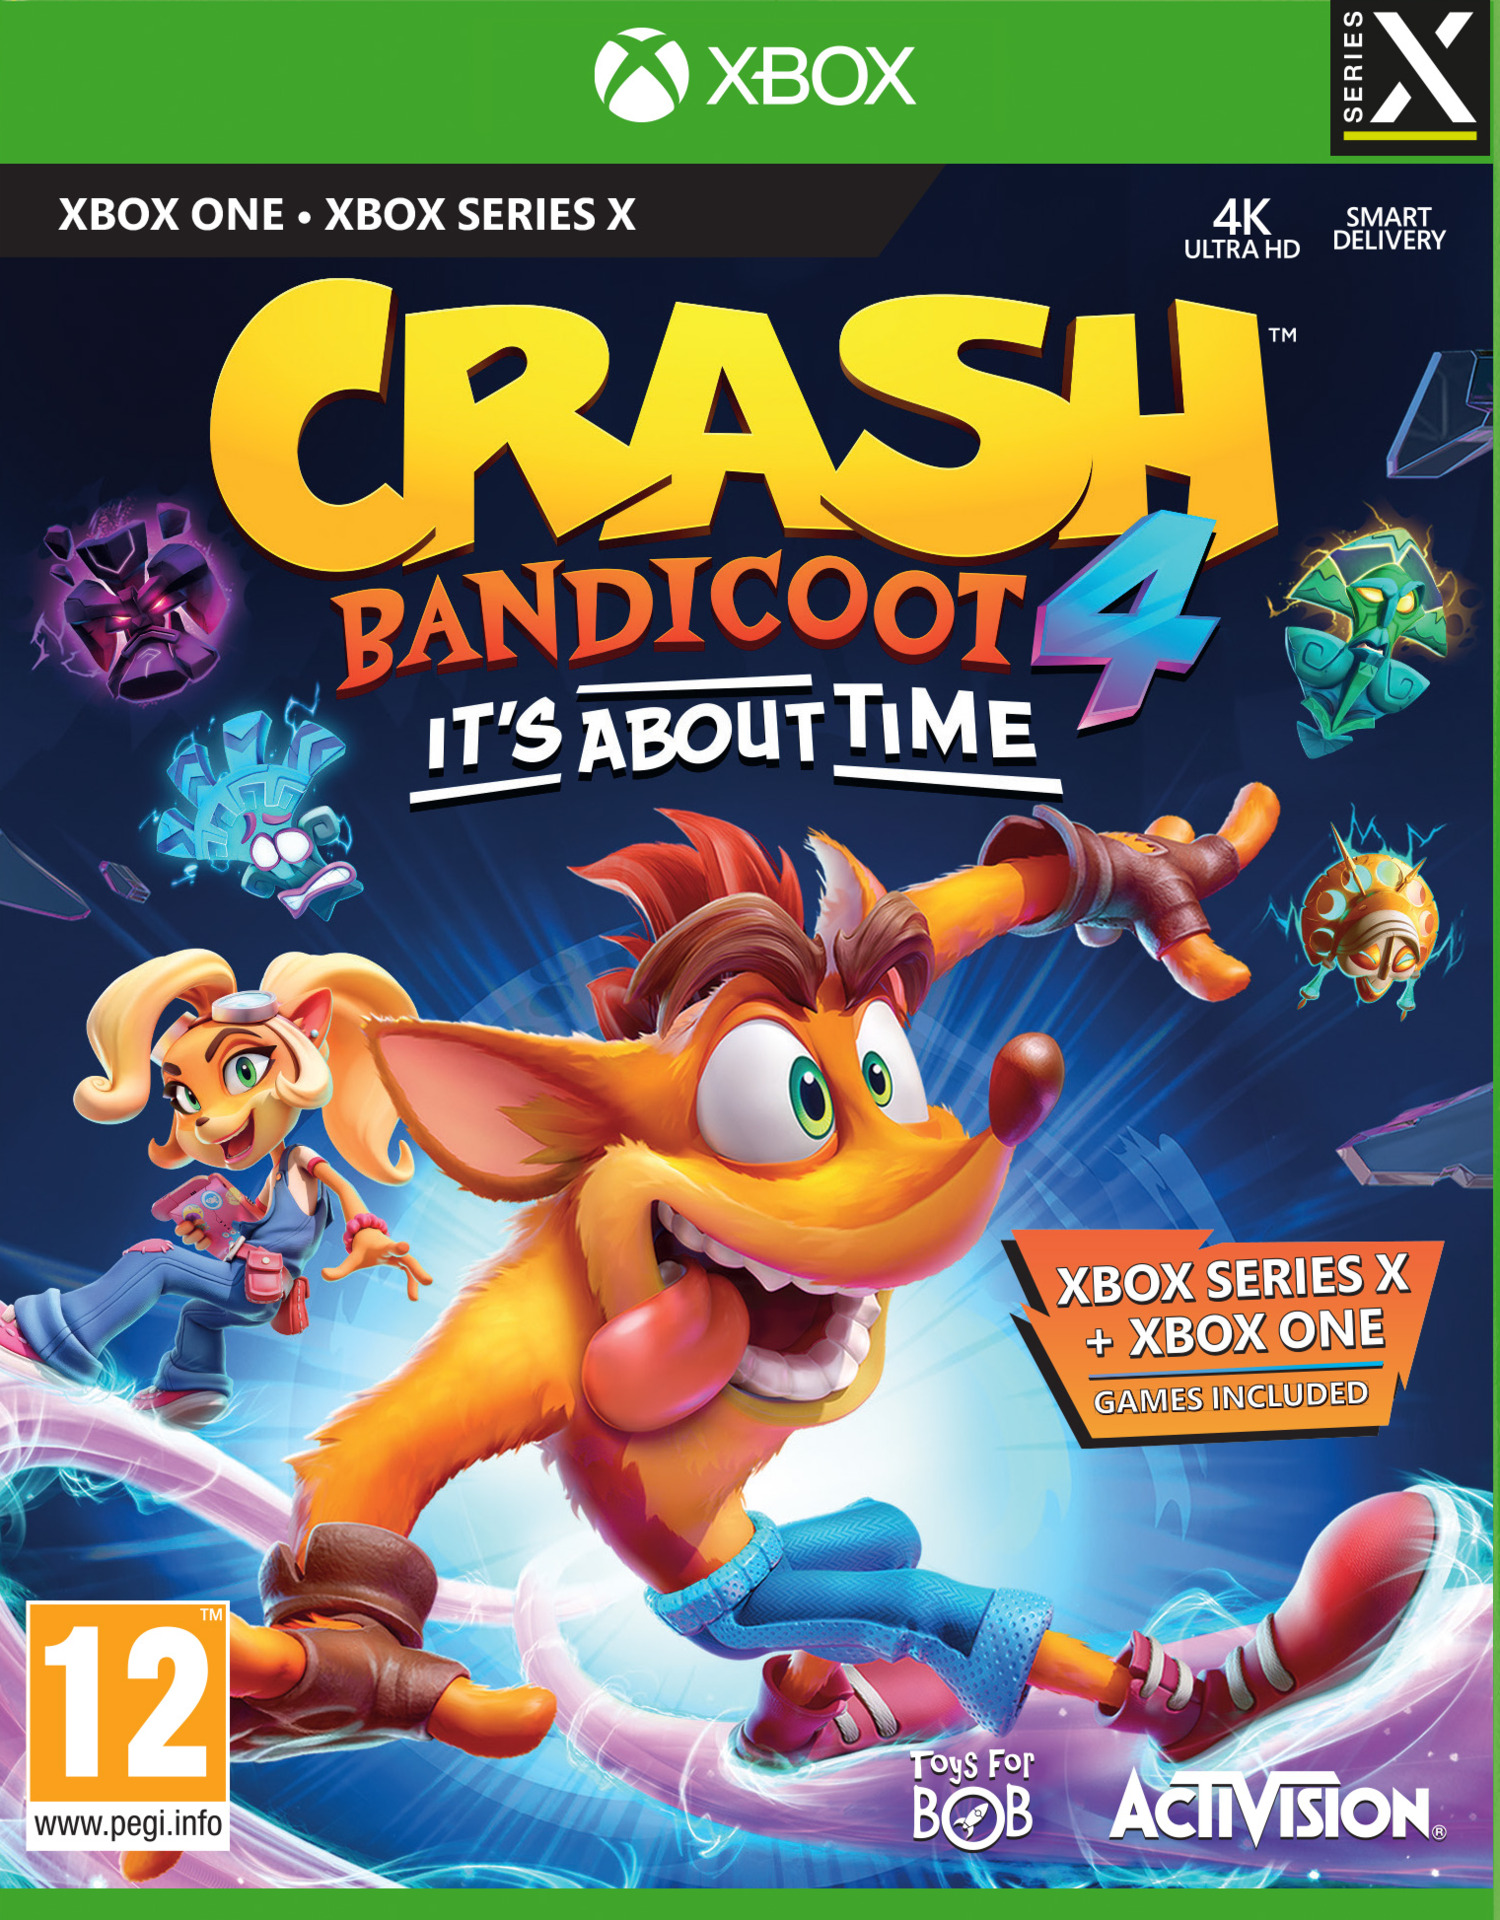 Crash Bandicoot 4: Its About Time (XBOX)